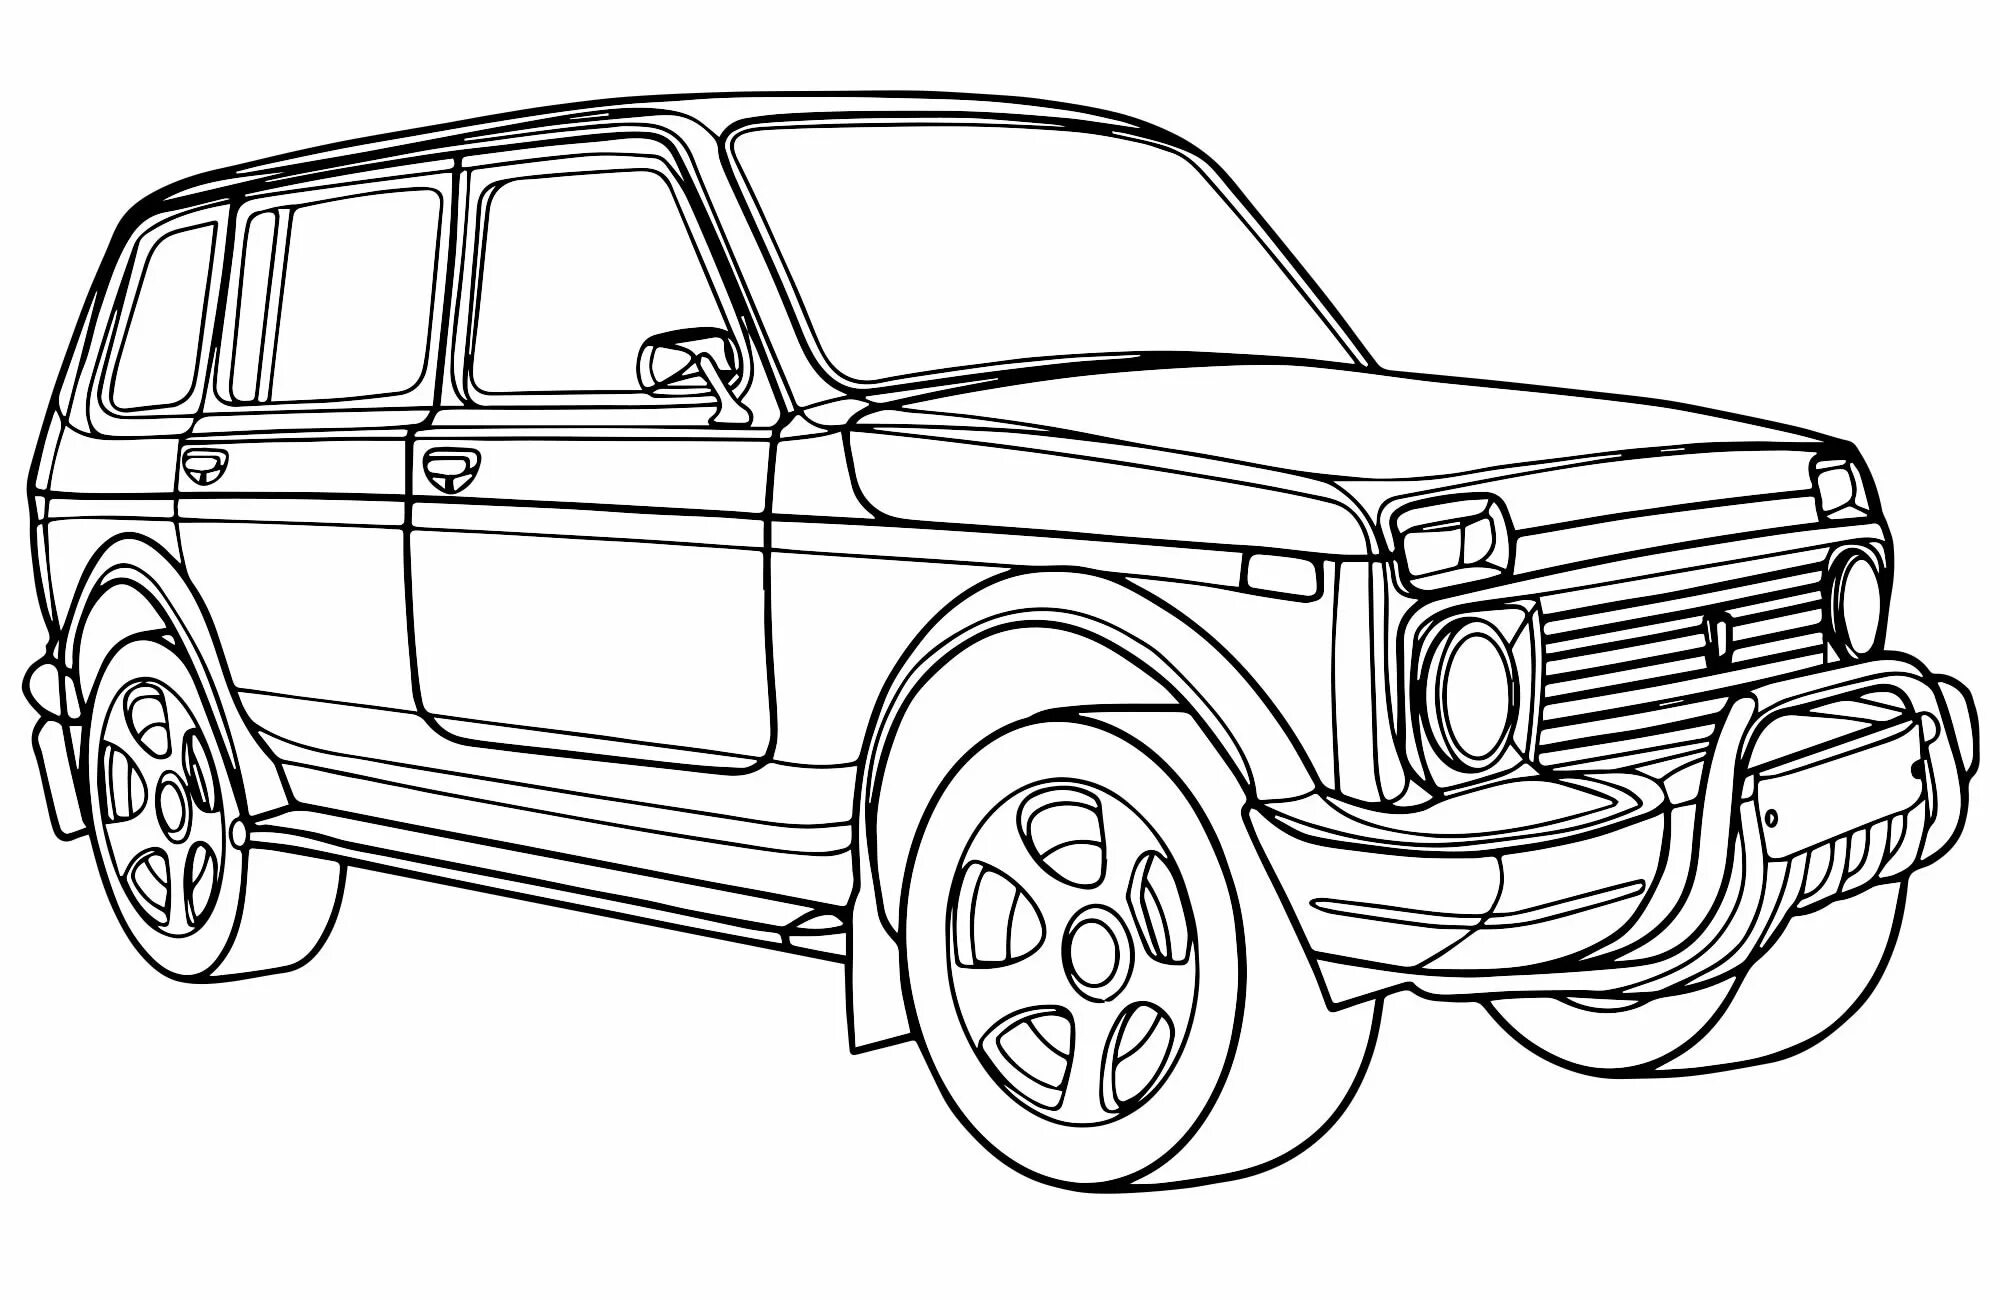 Shiny Russian cars coloring book